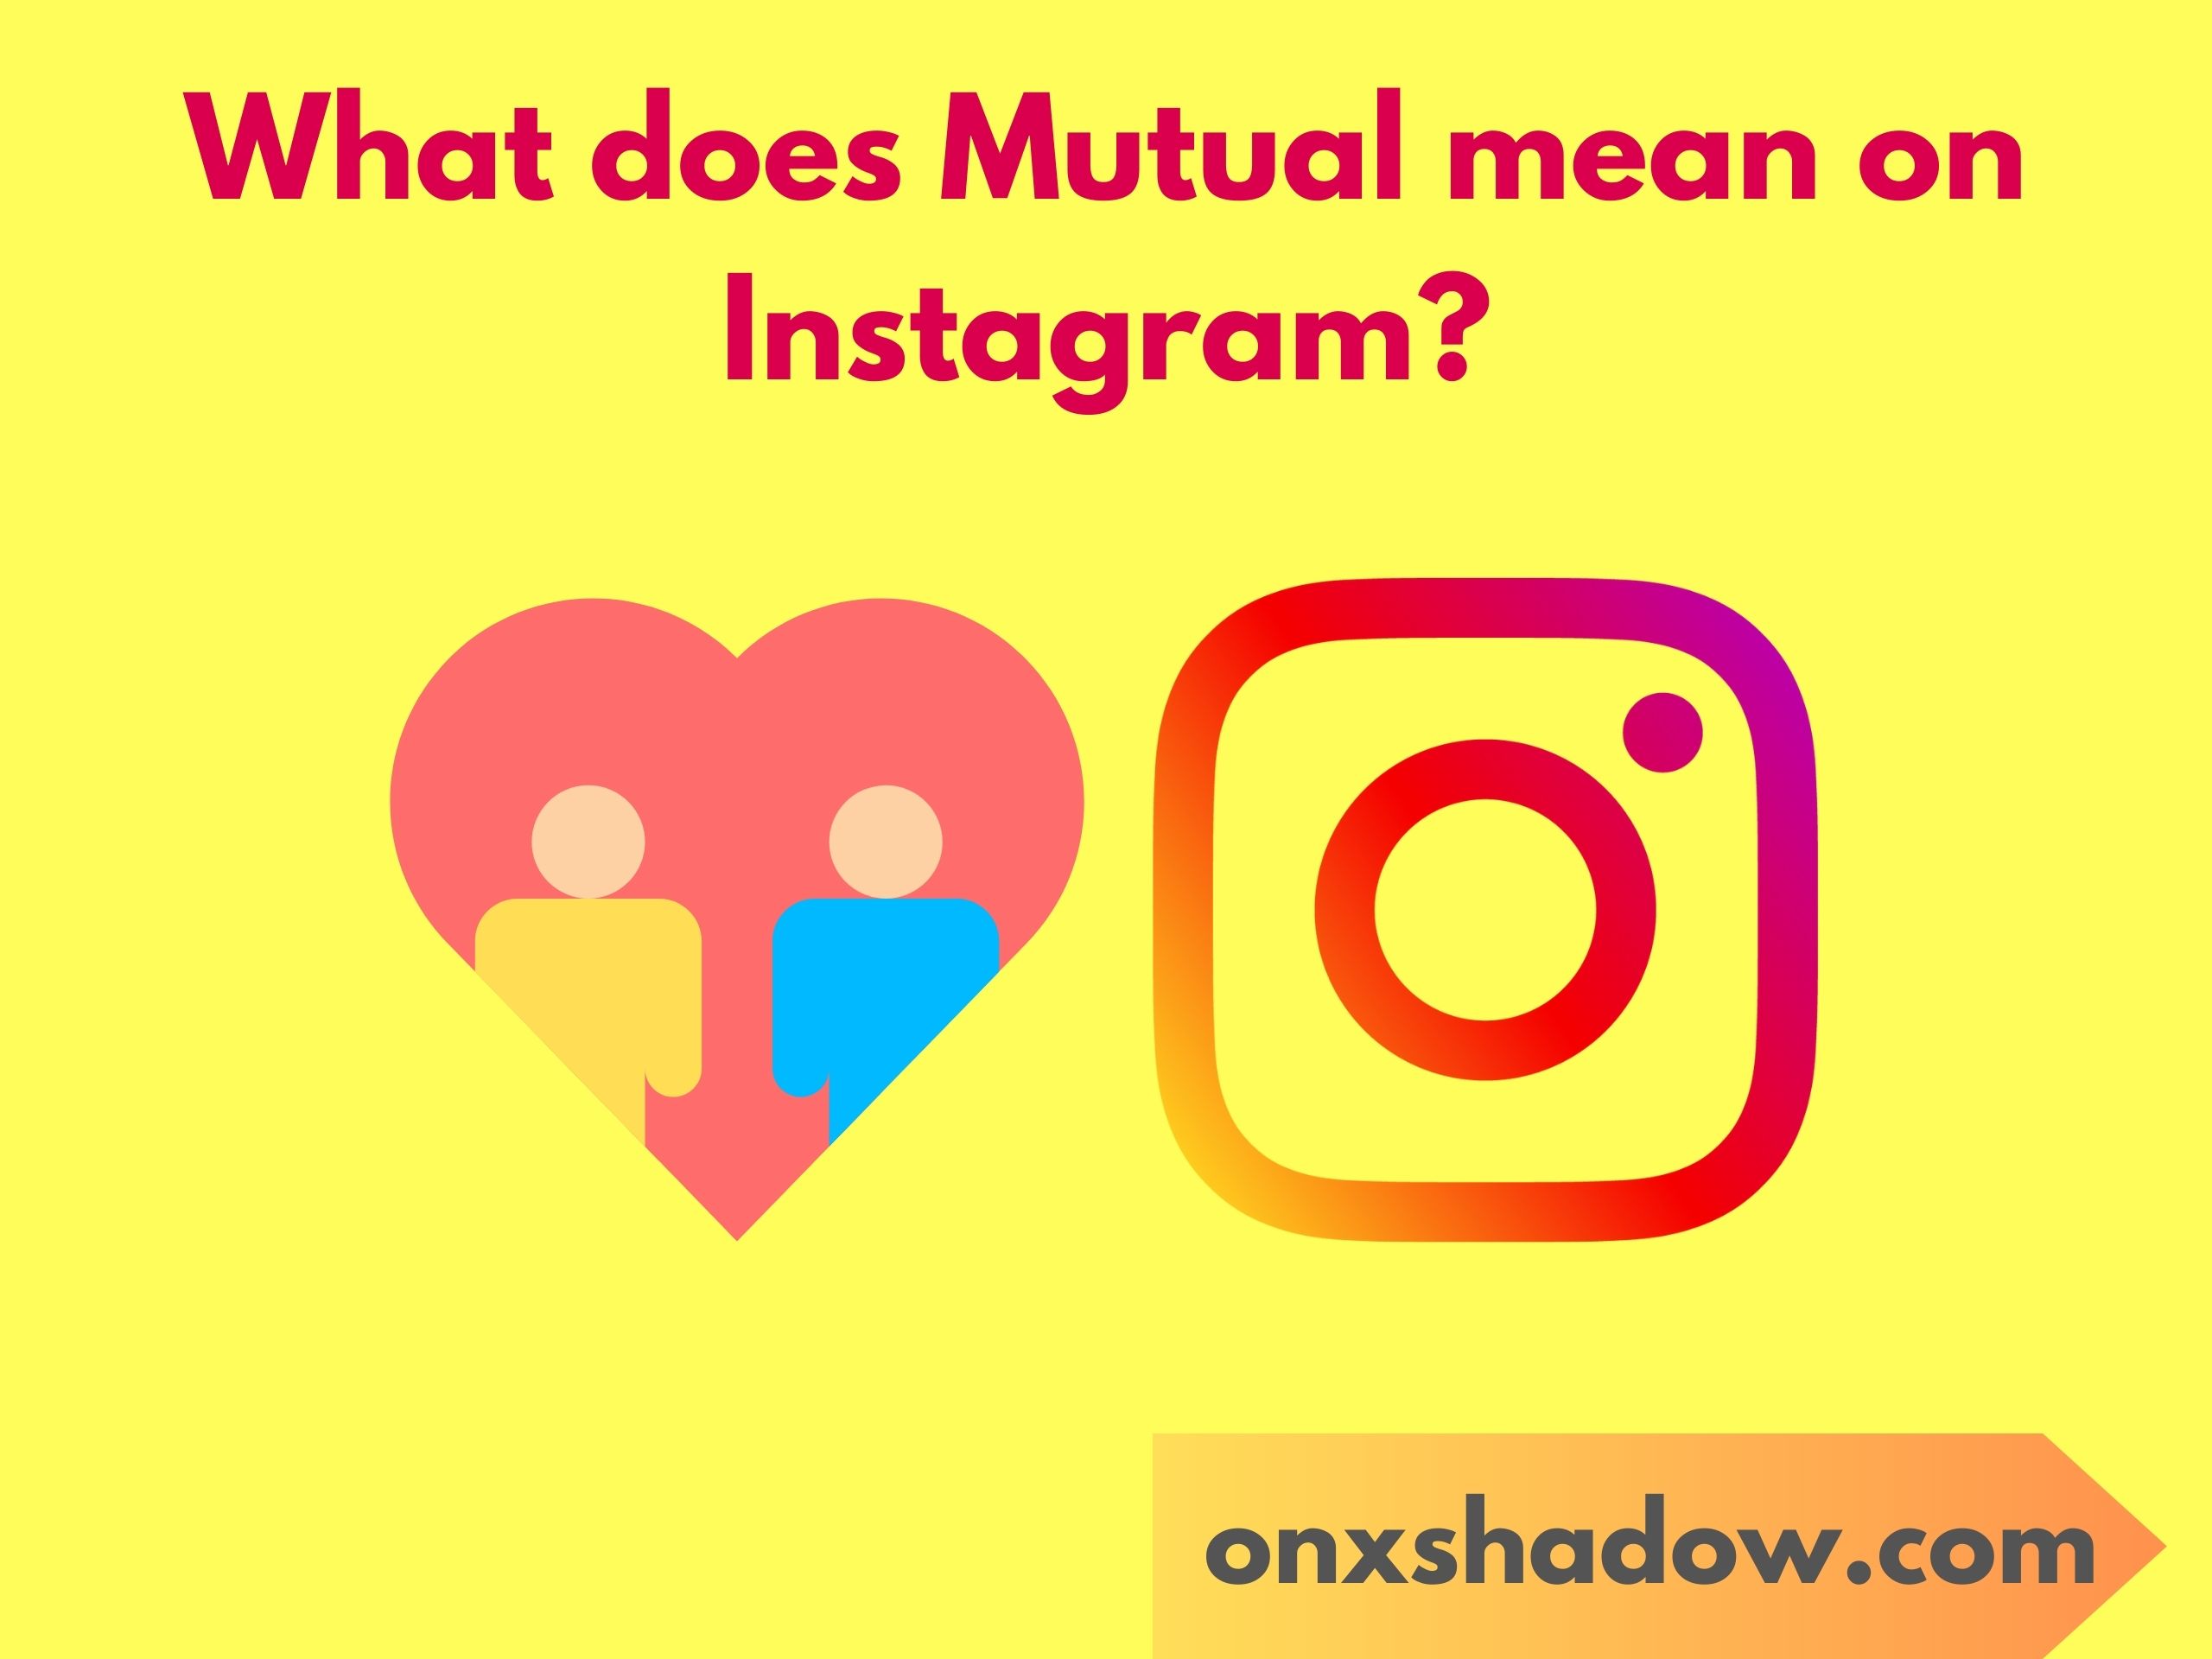 What does Mutual mean on Instagram?